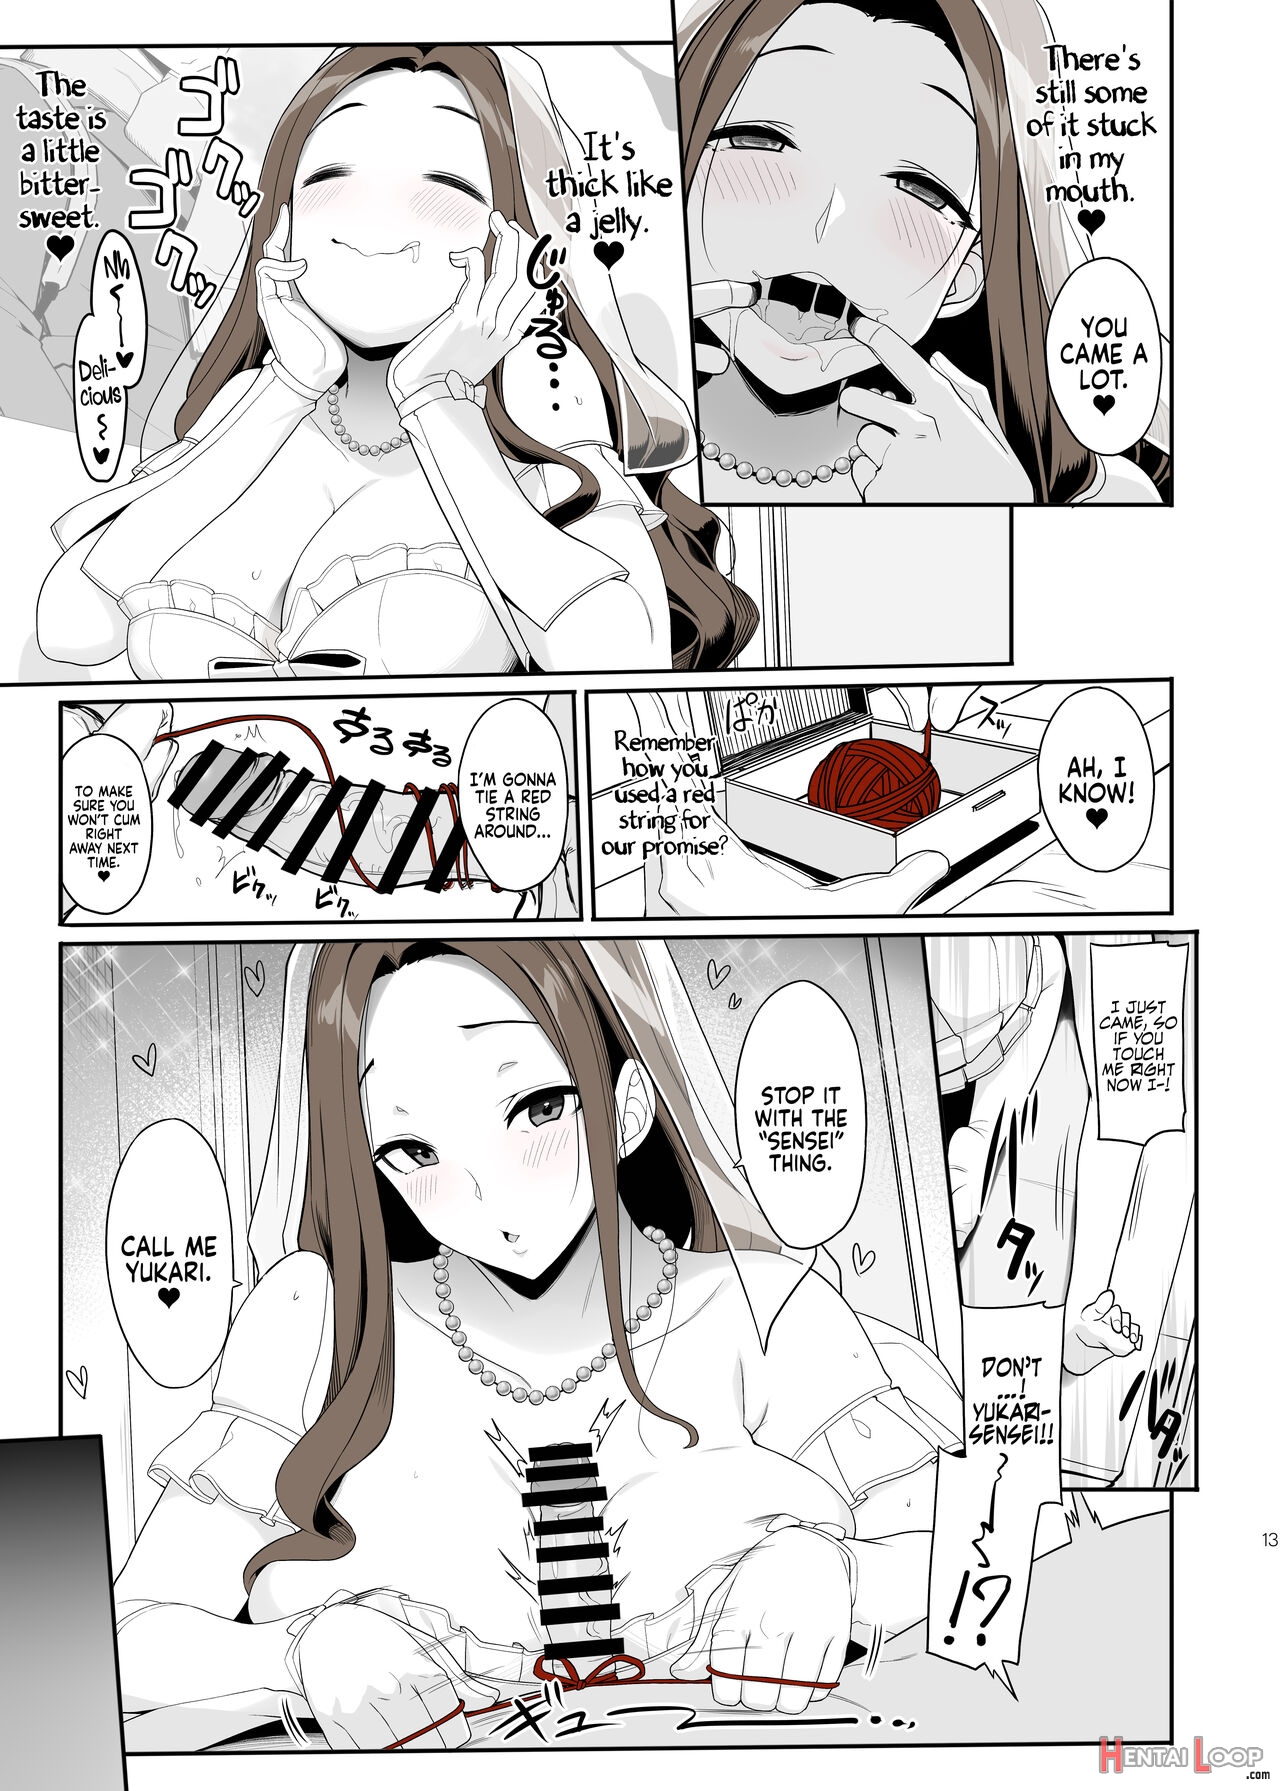 After Reuniting With The Onee-san Who Is Fixated On Me, I Was Proposed To With Sex And Got Addicted page 13